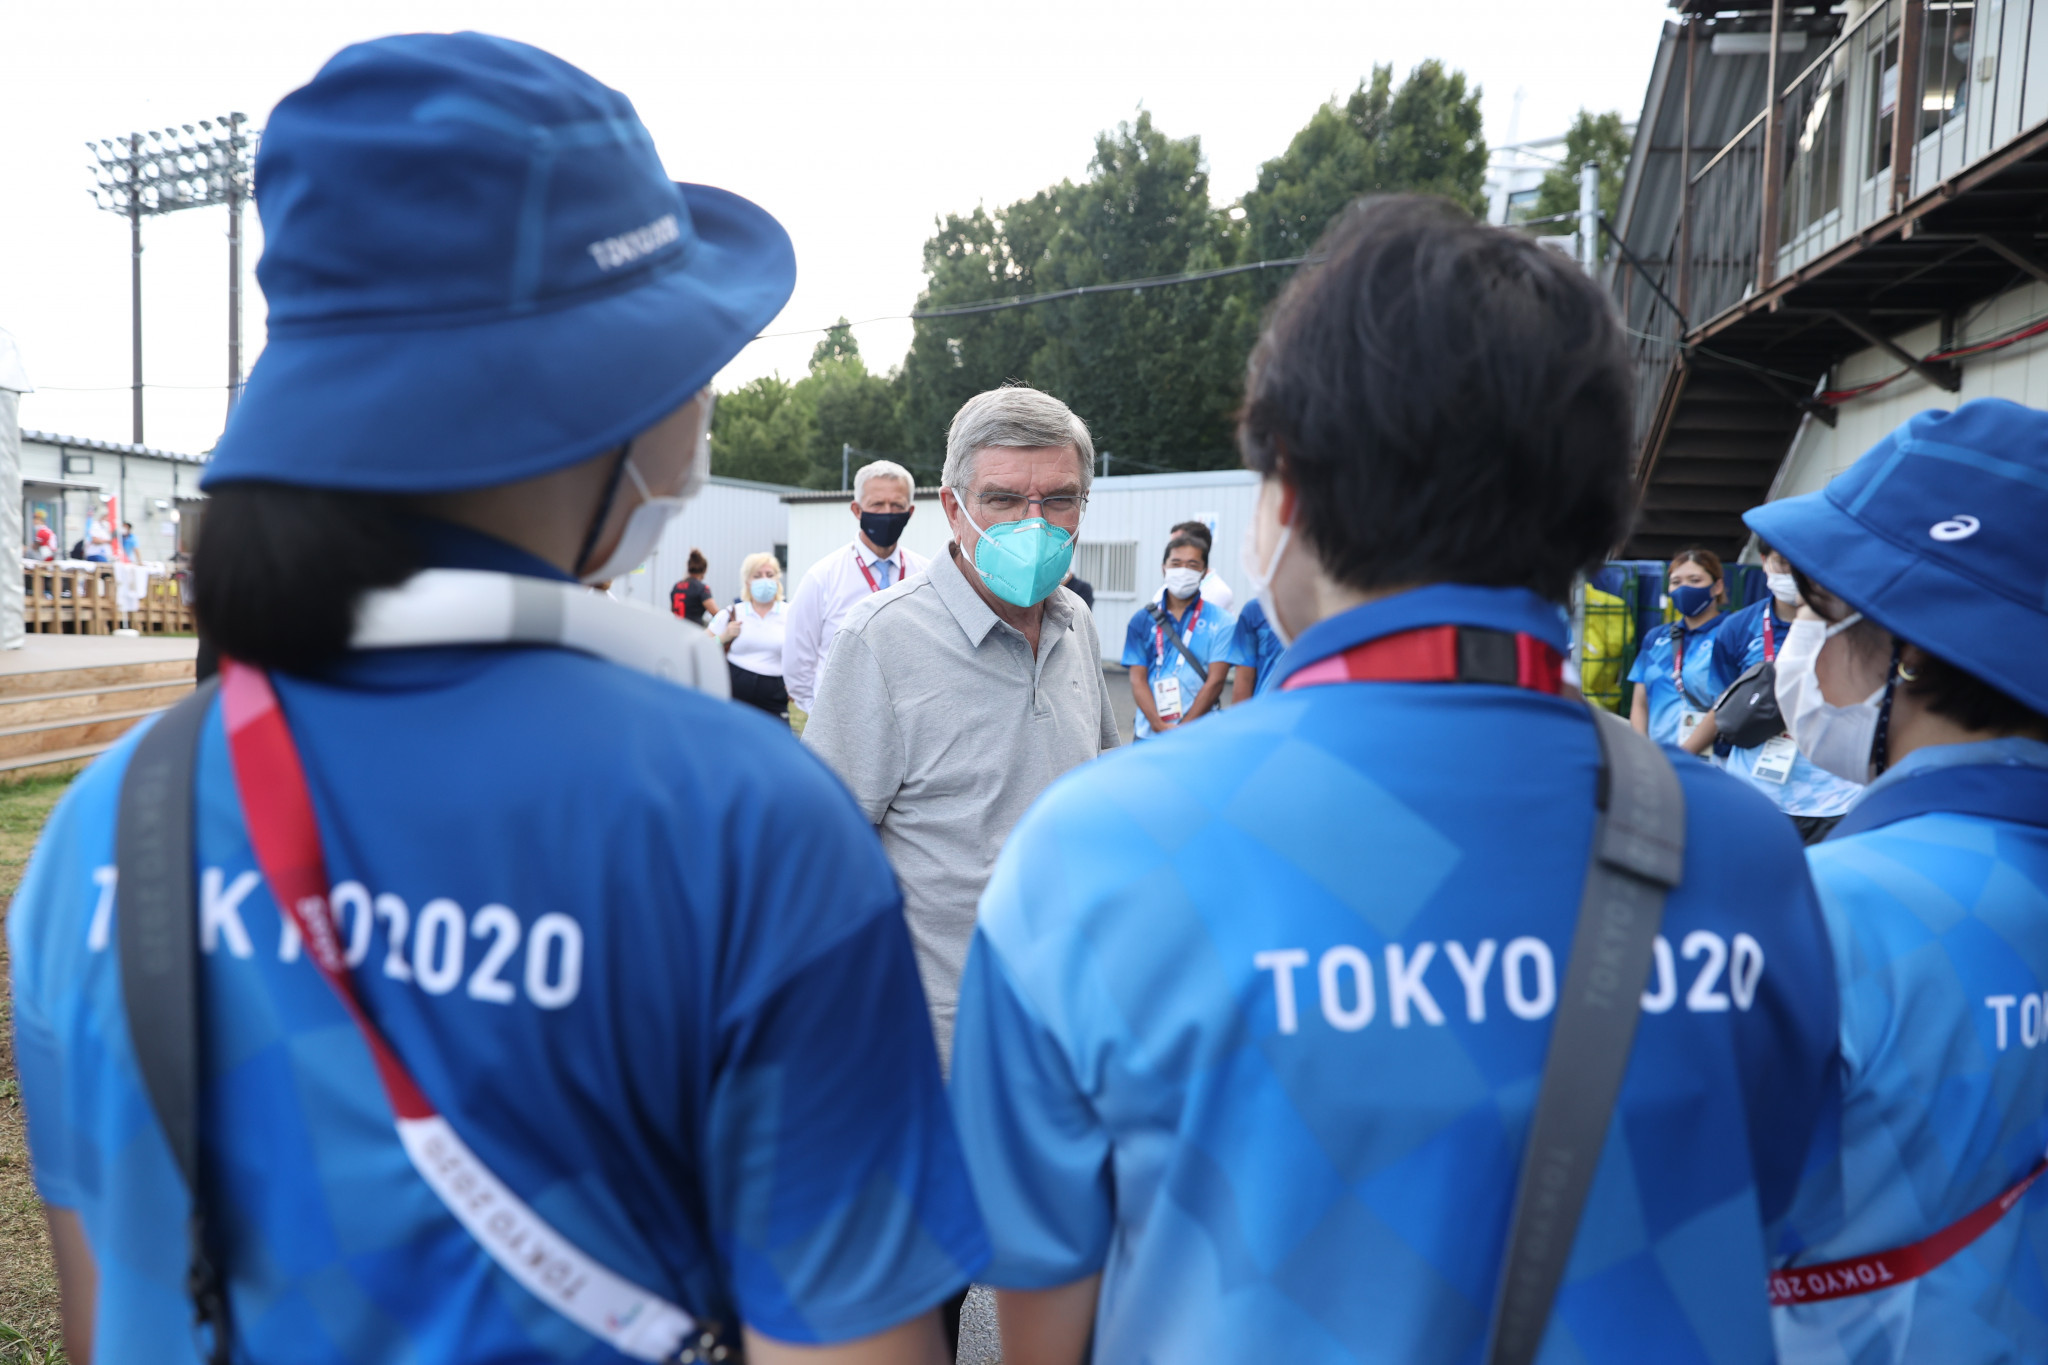 A total of $15 million worth of Tokyo 2020 uniforms remain unused because not so many volunteers were needed for the Olympic and Paralympic Games as first planned ©Getty Images